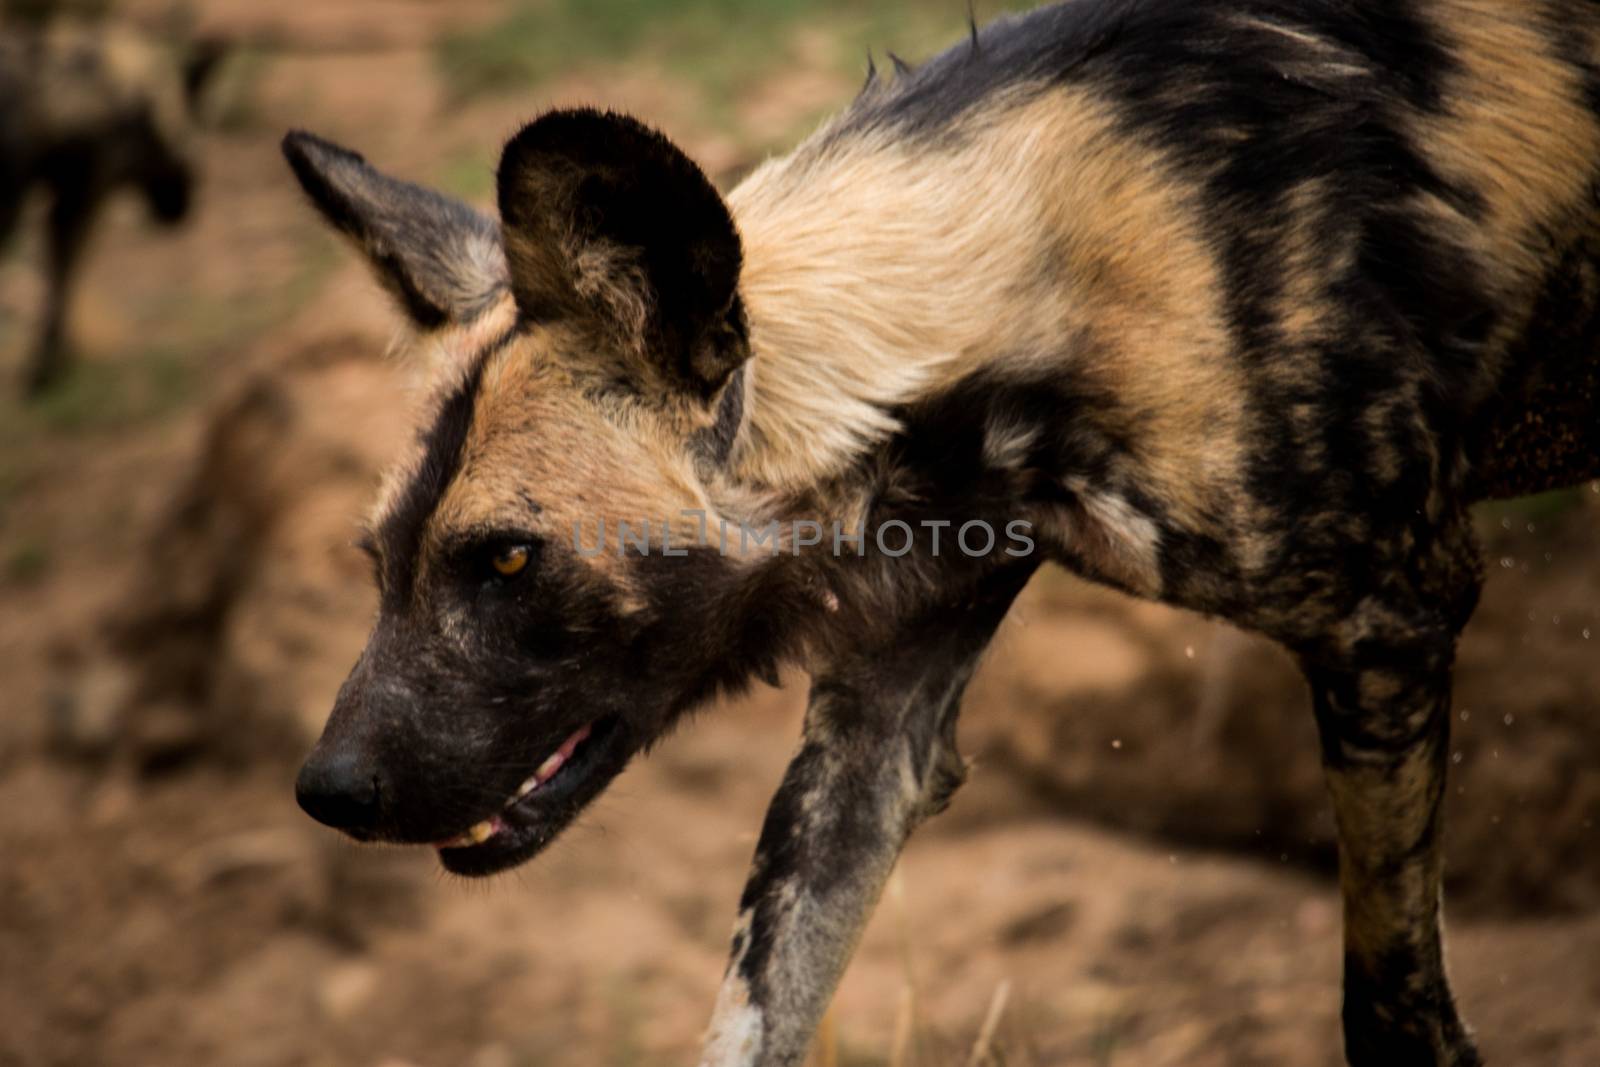 An African wild dog in the Kruger National Park, South Africa. by Simoneemanphotography